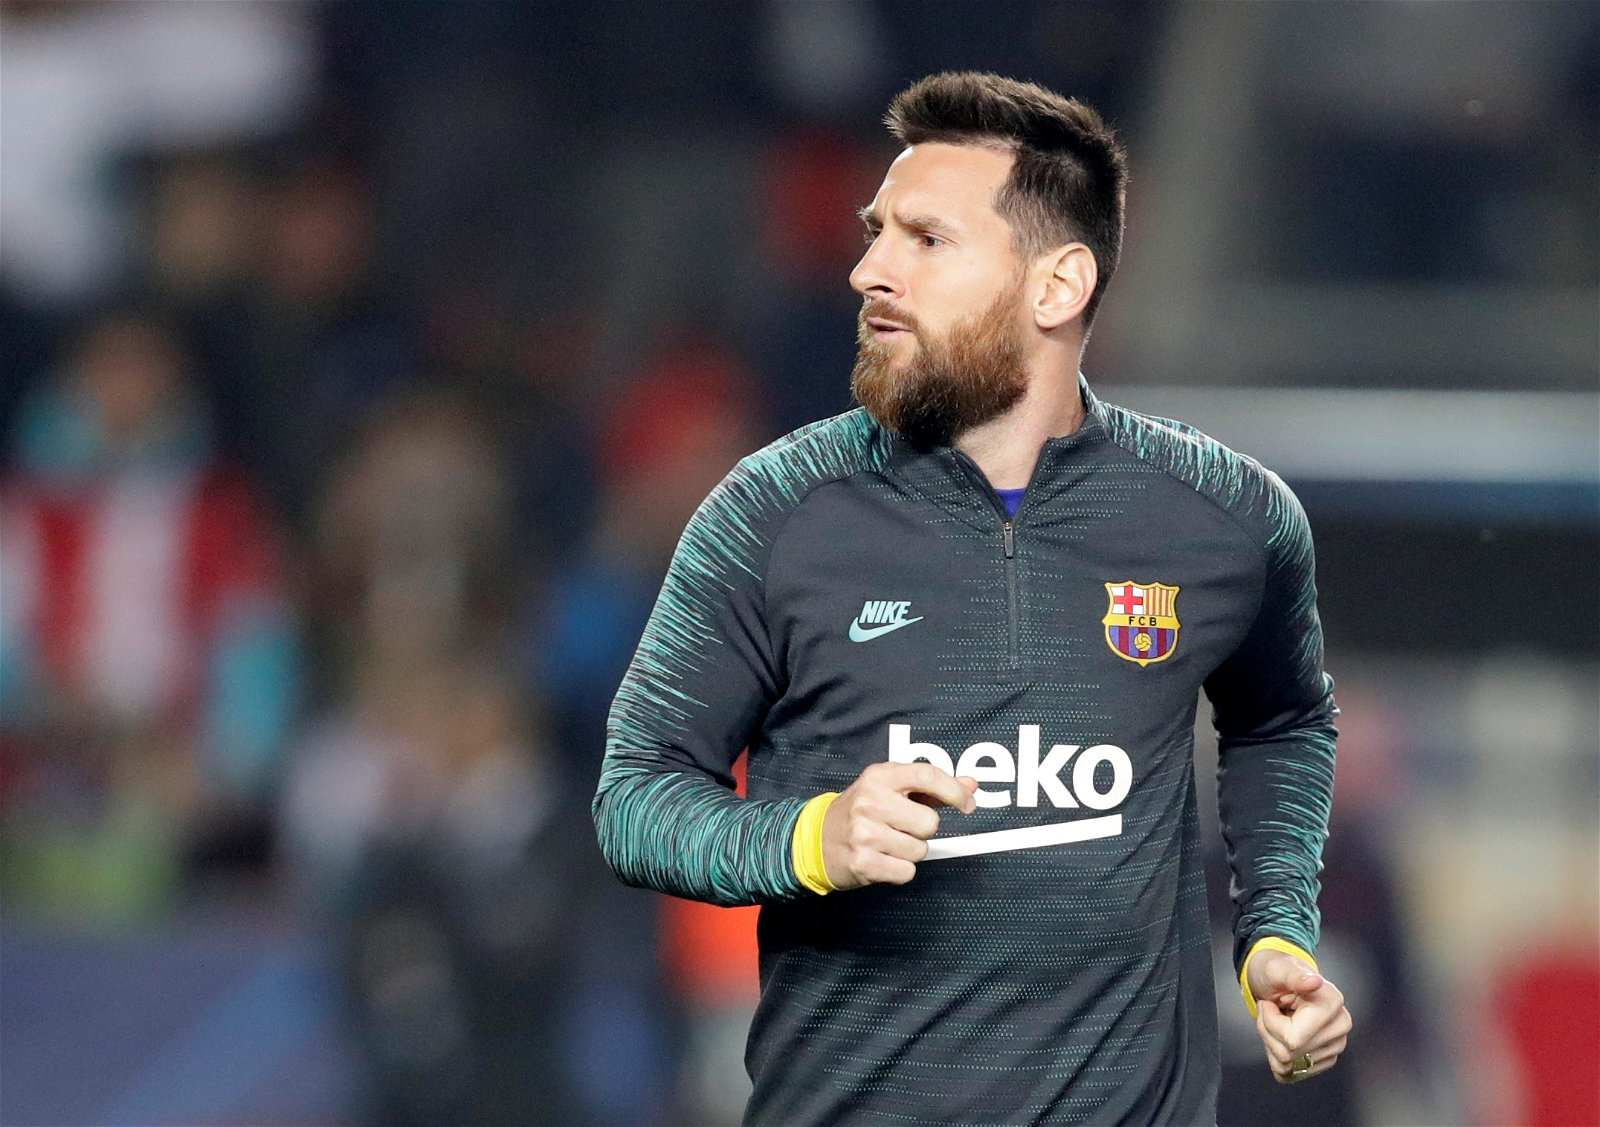 Lionel Messi transfer would transform Manchester City instantly